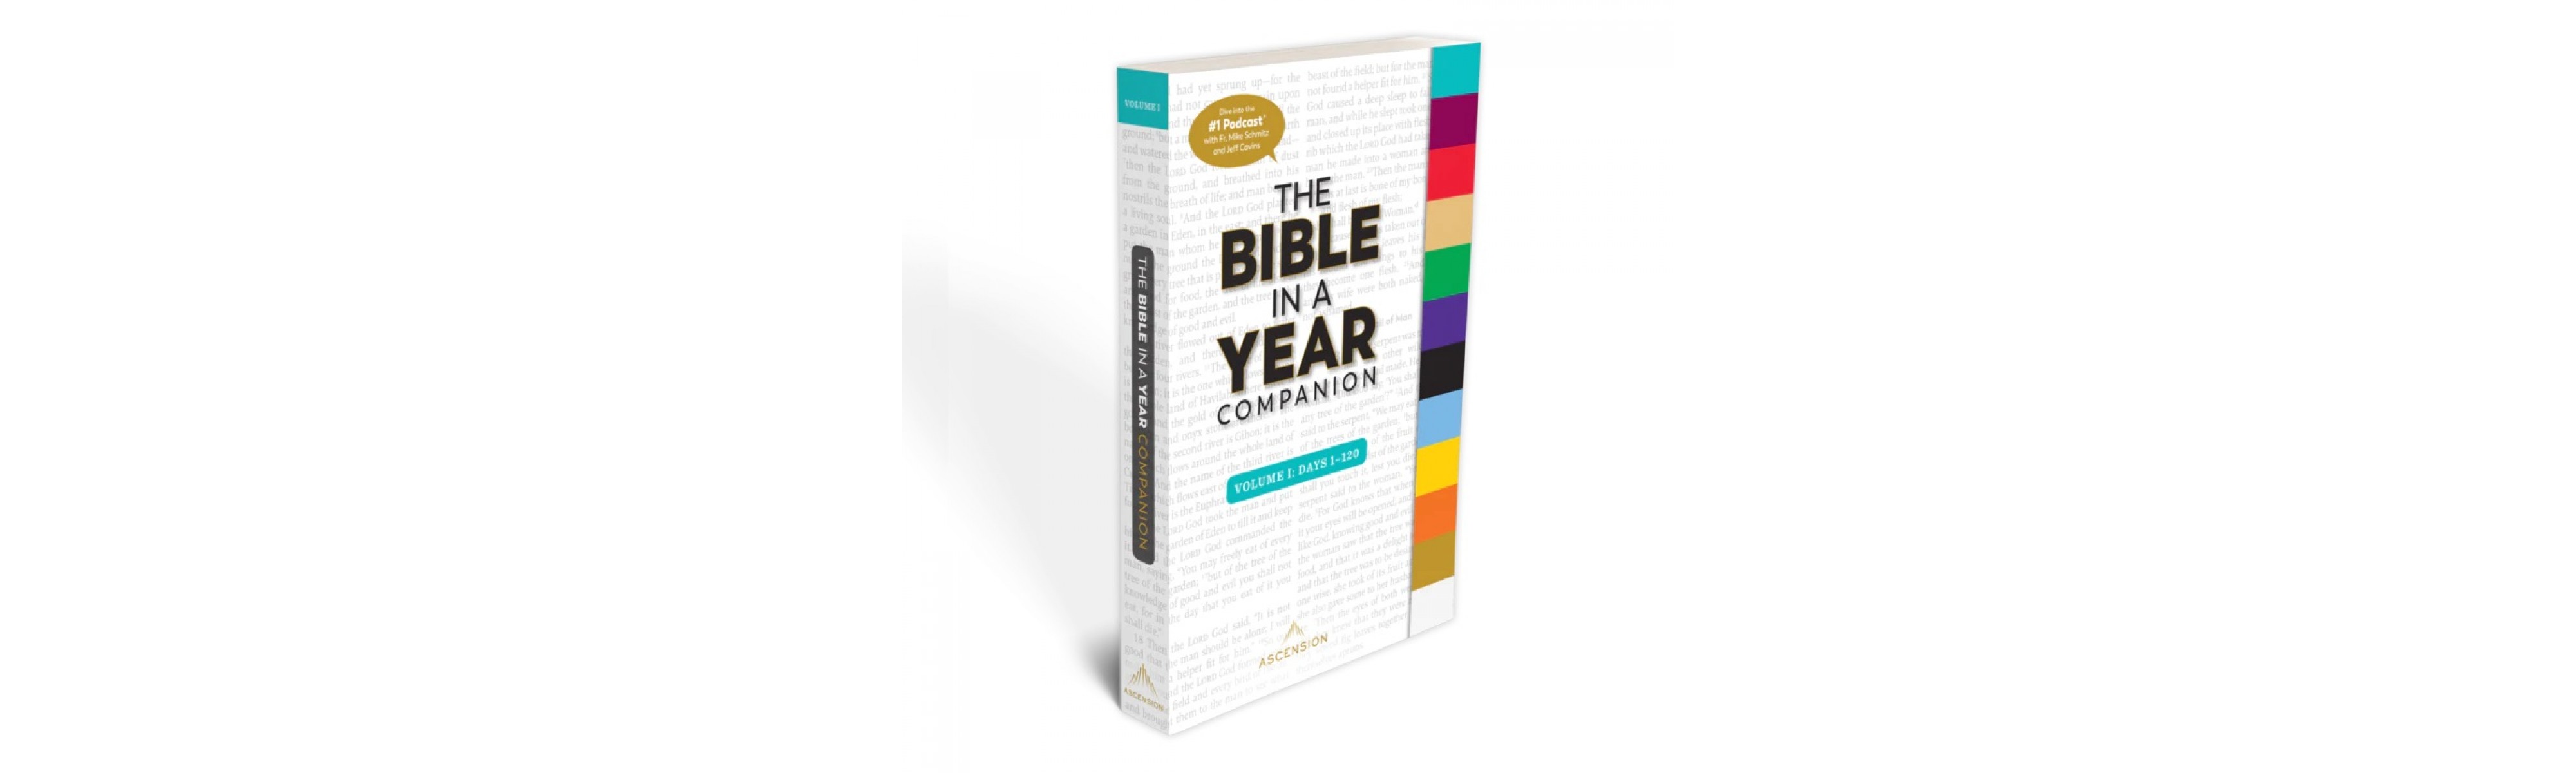 The  Bible in a Year Companion Volume 1